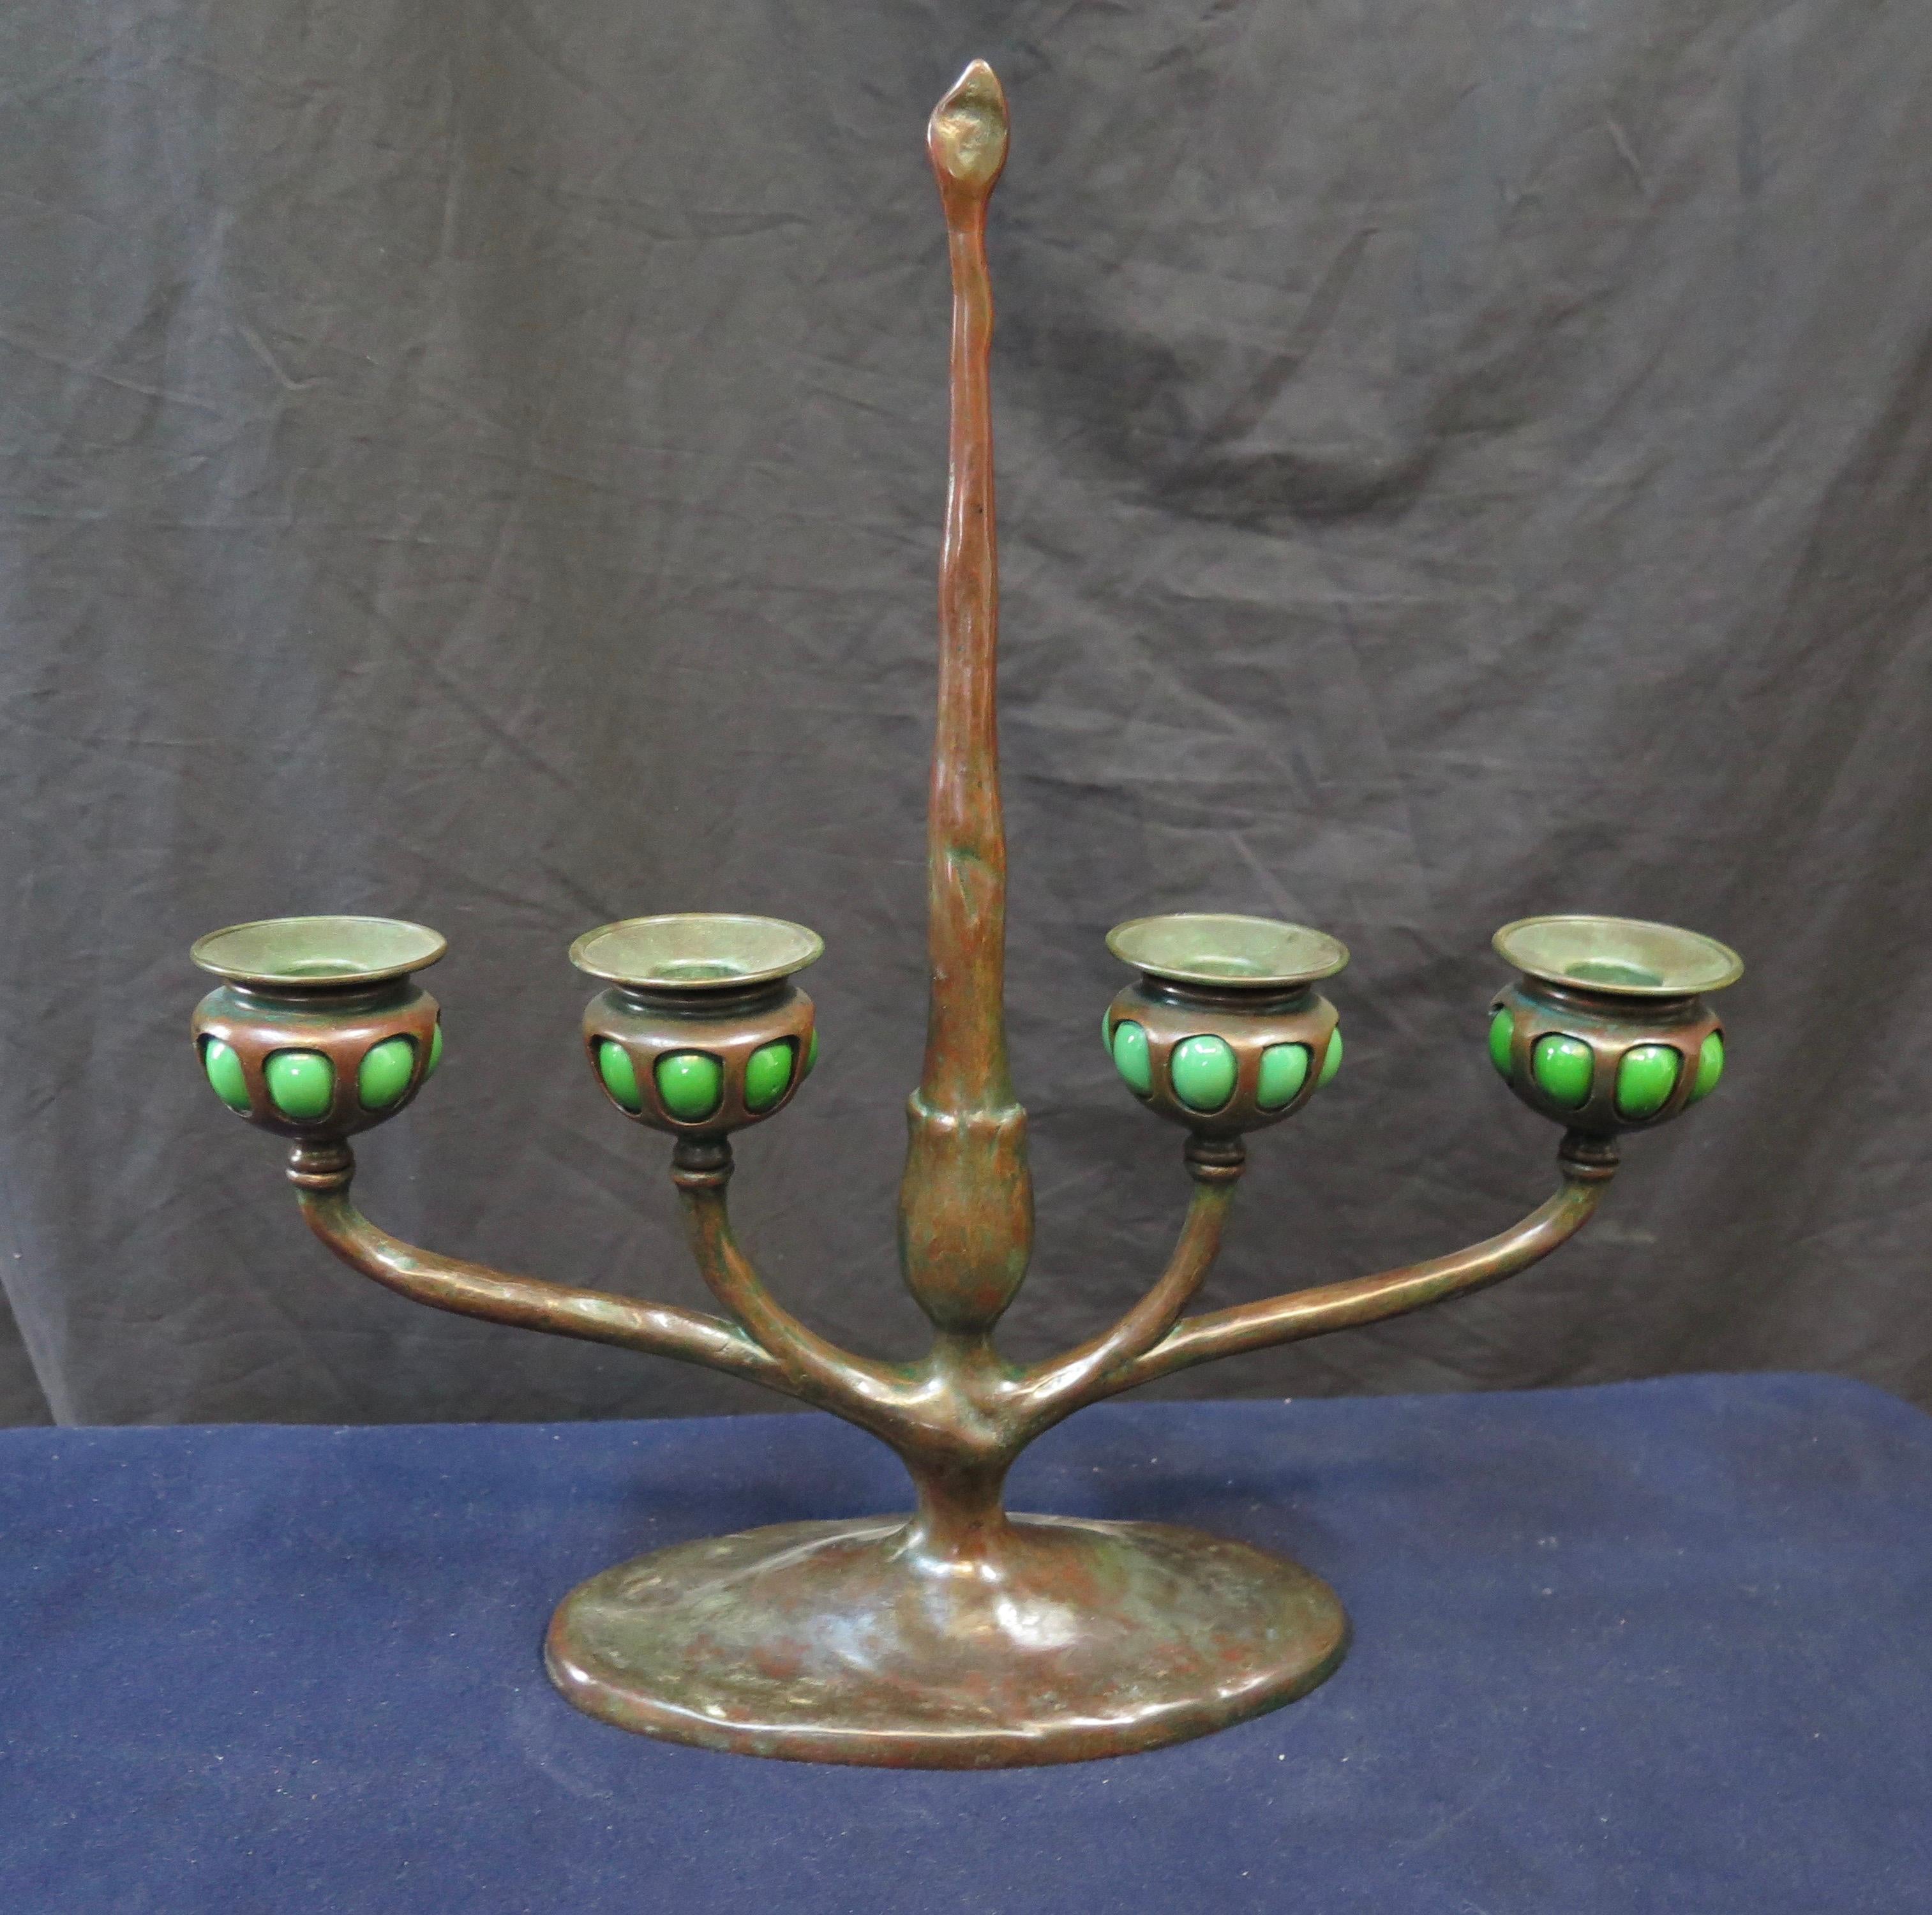 This vintage patinated bronze candelabra was made by the Tiffany Studios, New York & dates from the early 20th century. The decorative four place candelabra is designed with blown out green glass candle cups. Each candle cup retains an original